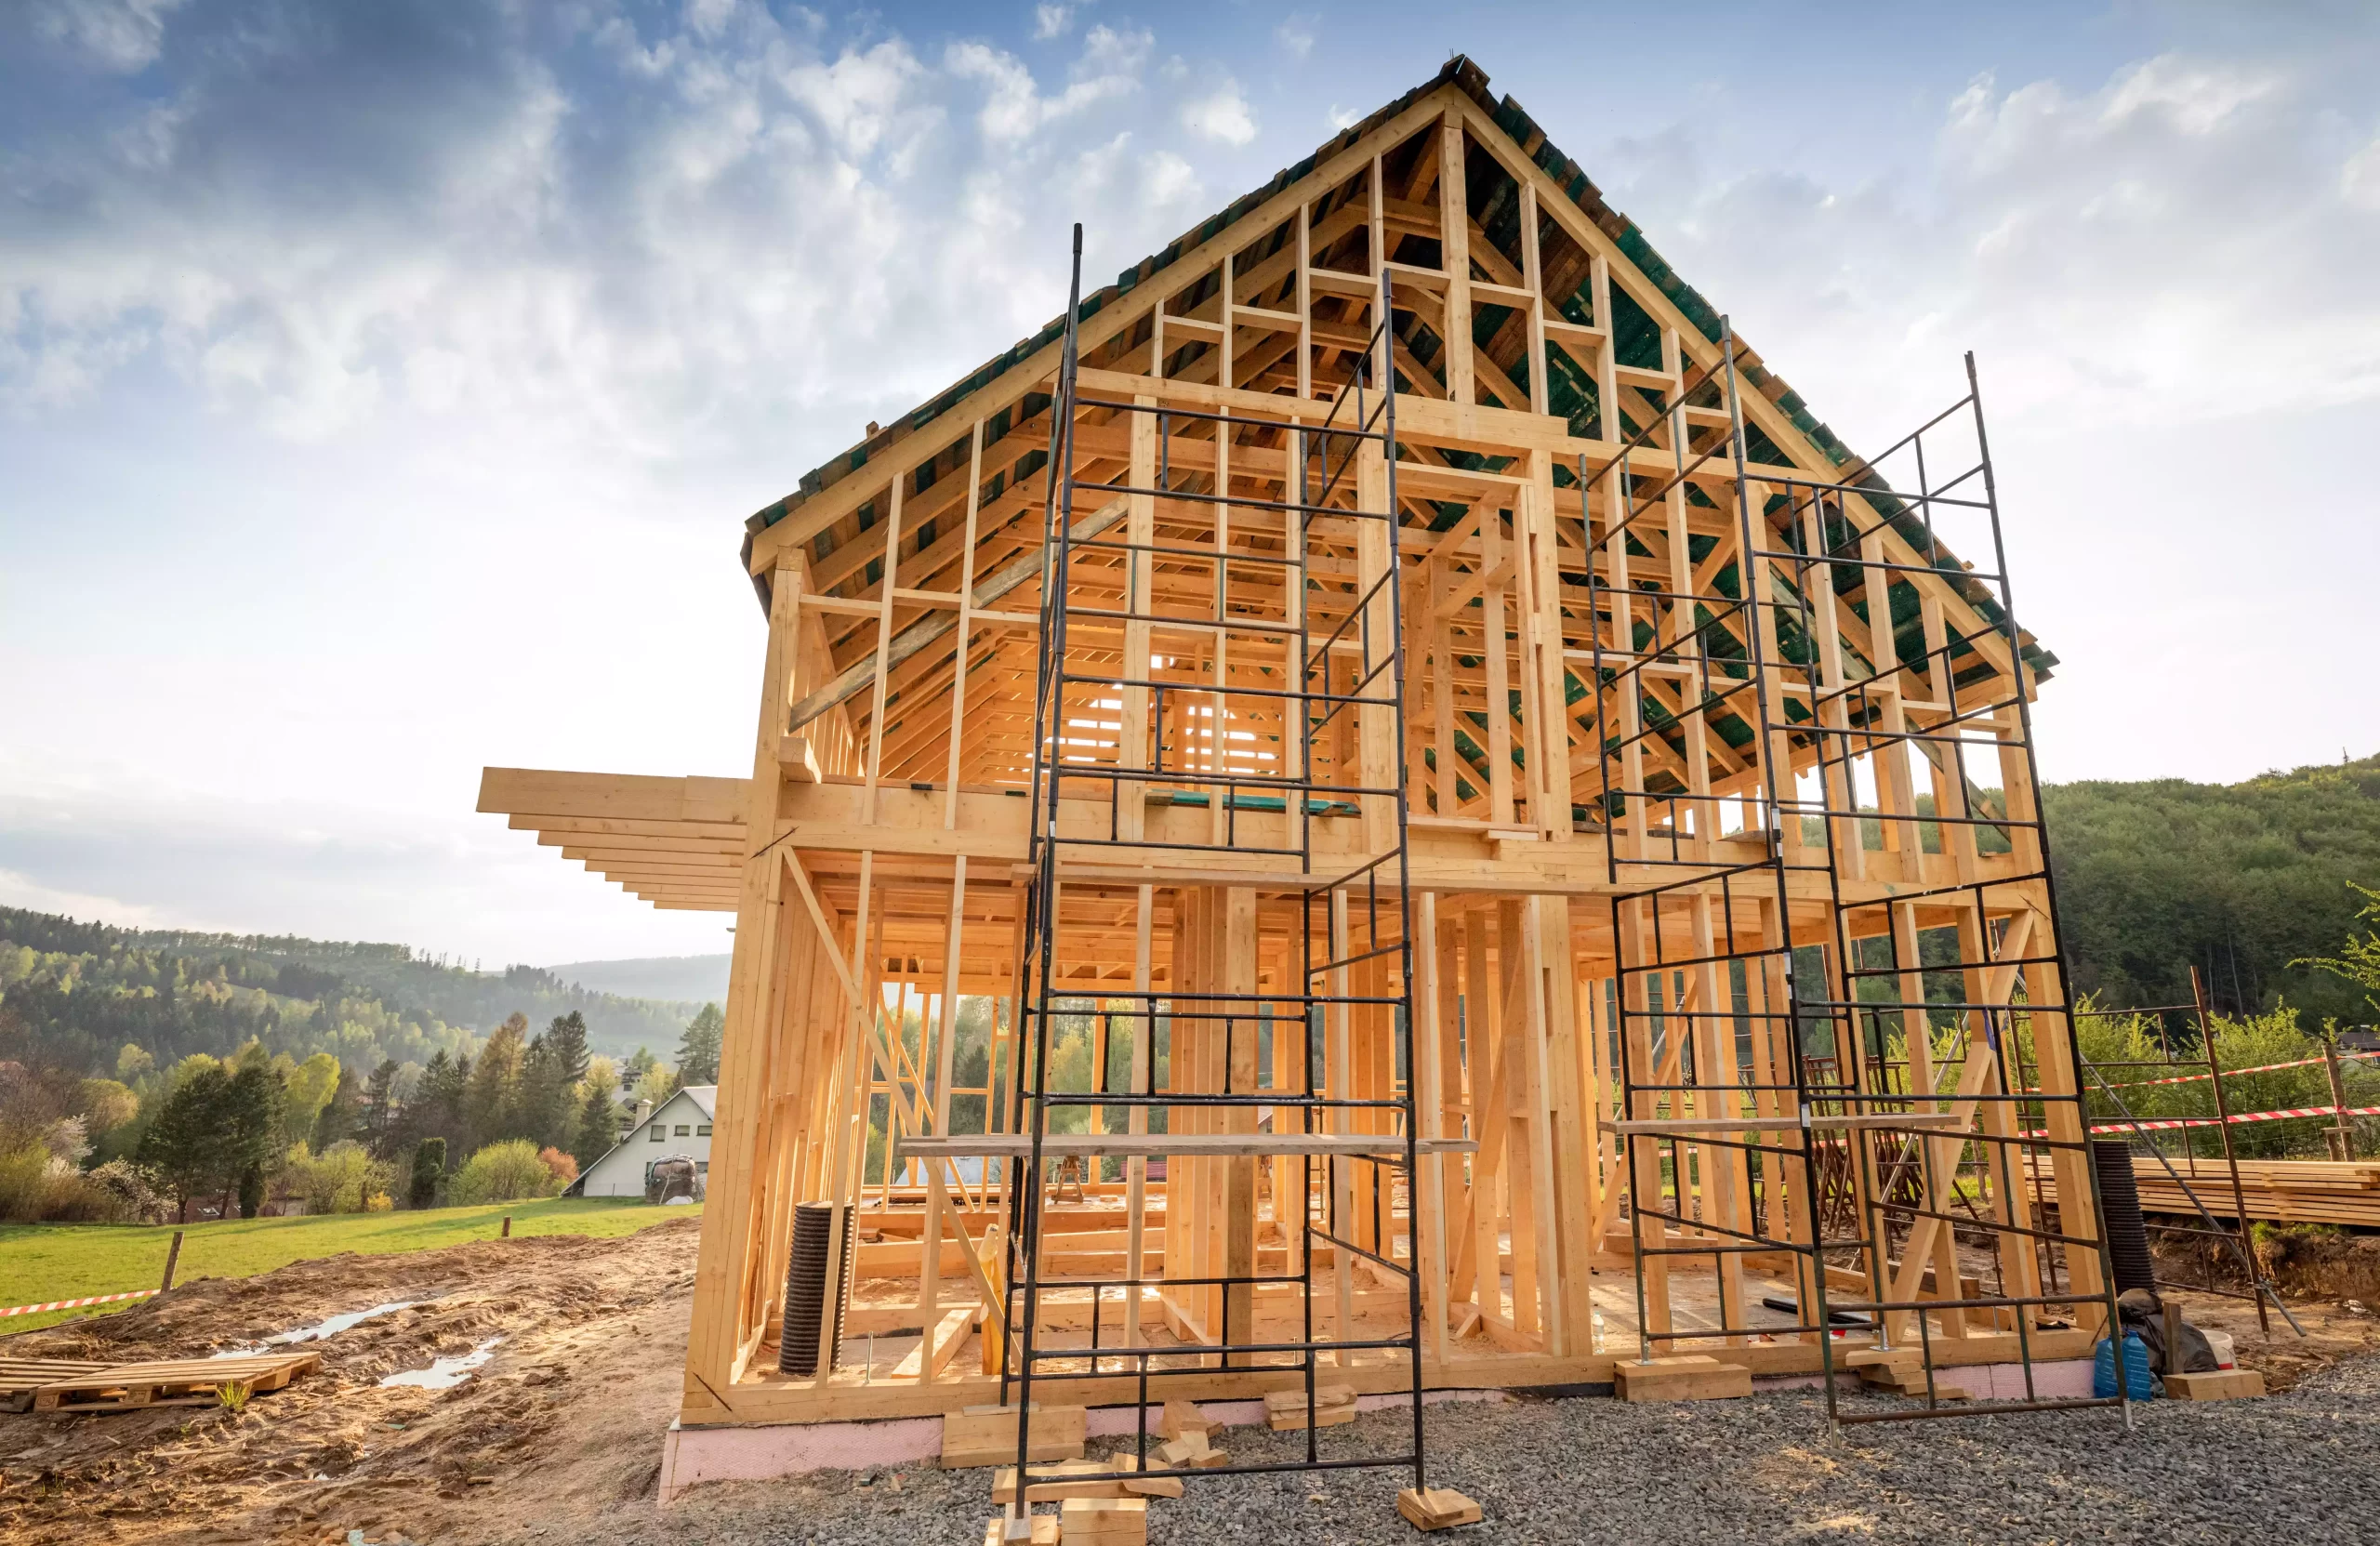 new-wooden-frame-house-under-construction-outdoor-2023-11-27-04-59-26-utc